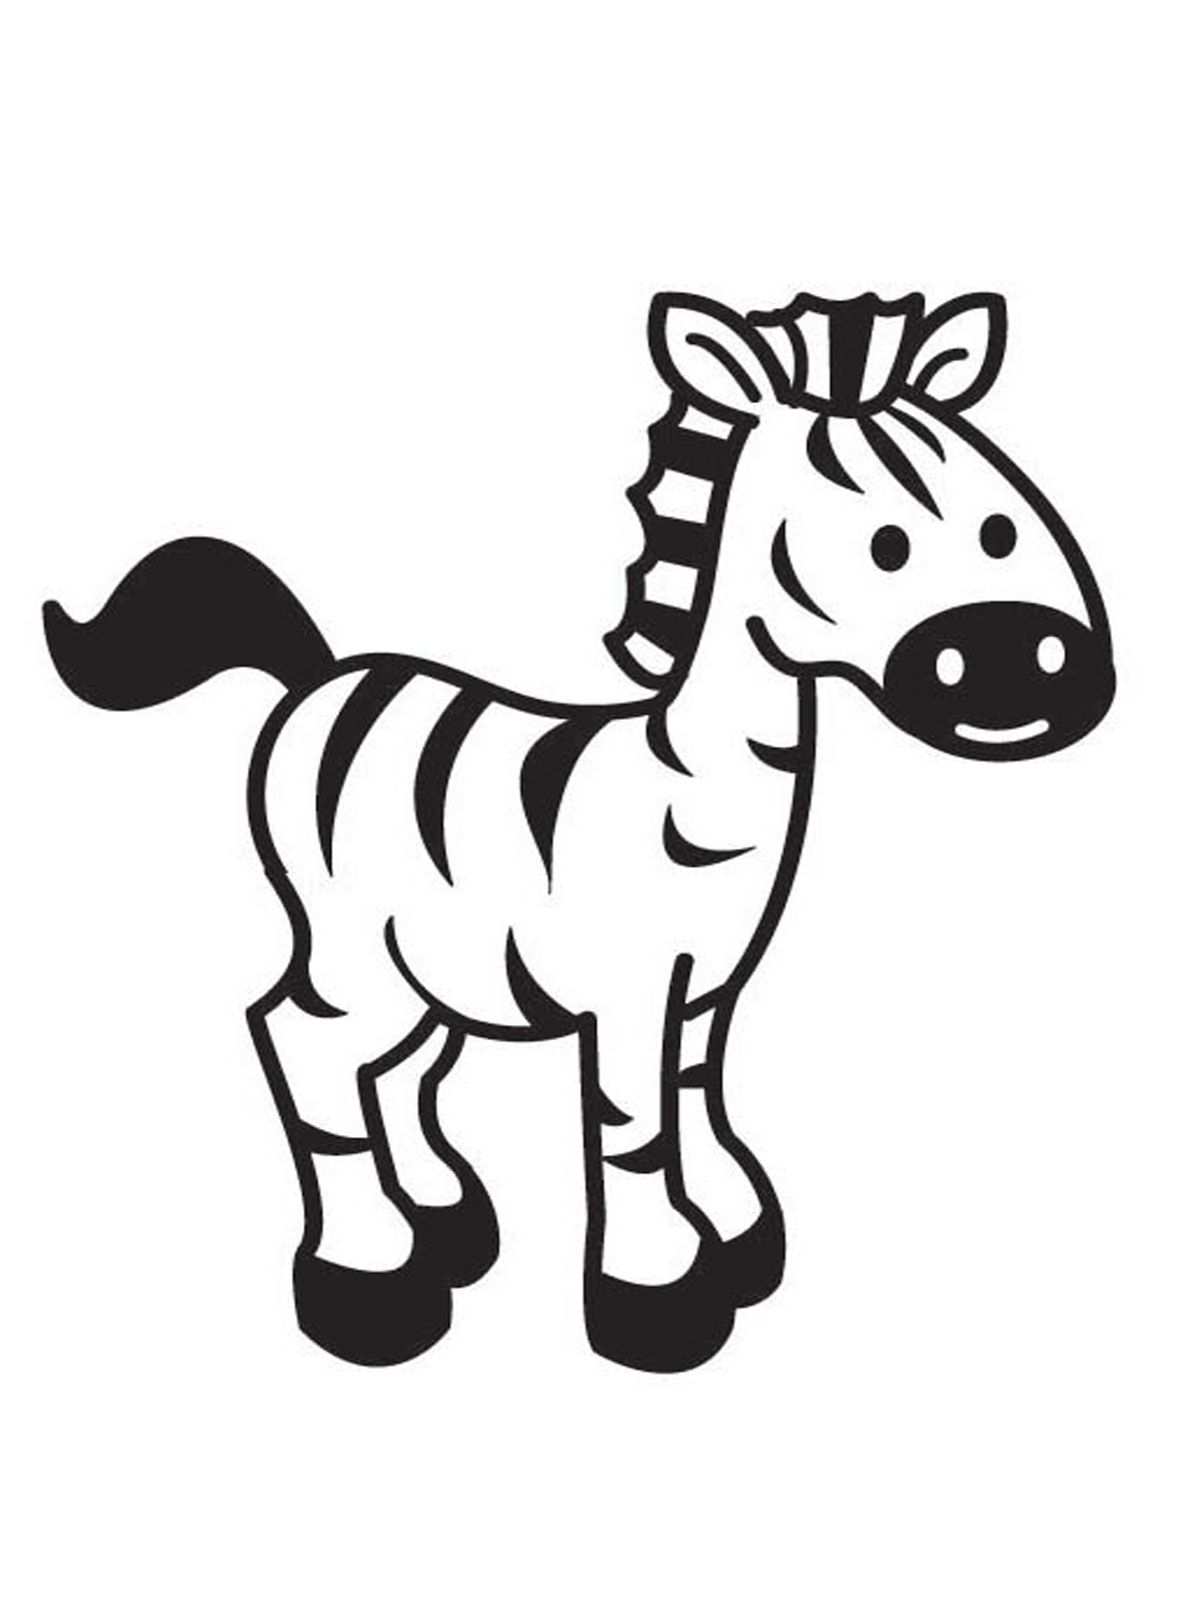 Zebra Coloring Pages To Print Zebra Coloring Pages Animal